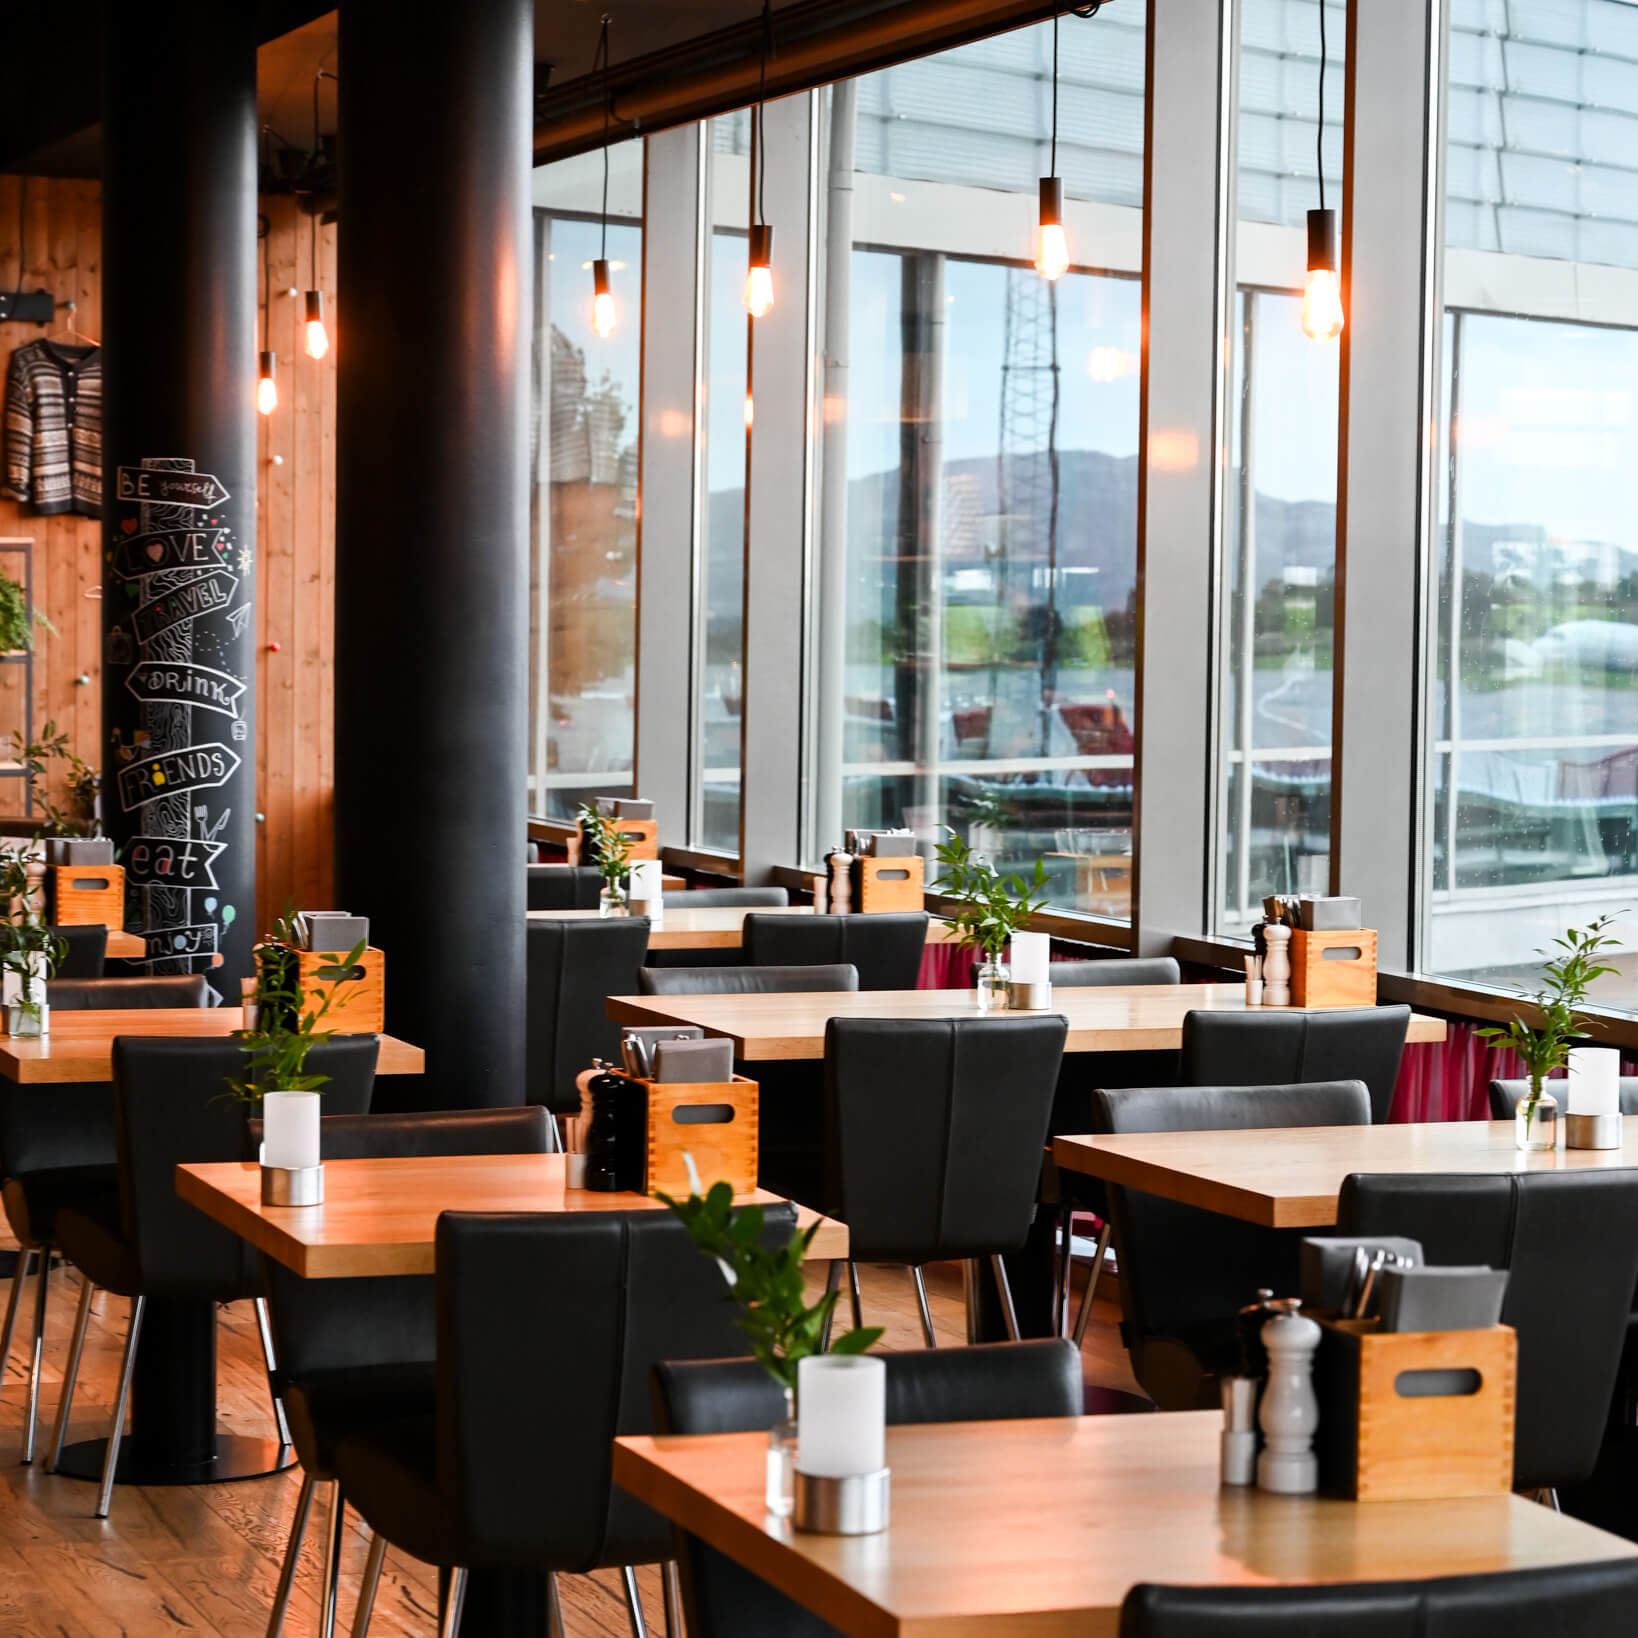 A modern restaurant interior with wooden tables, black chairs, pendant lights, and large windows providing natural light.